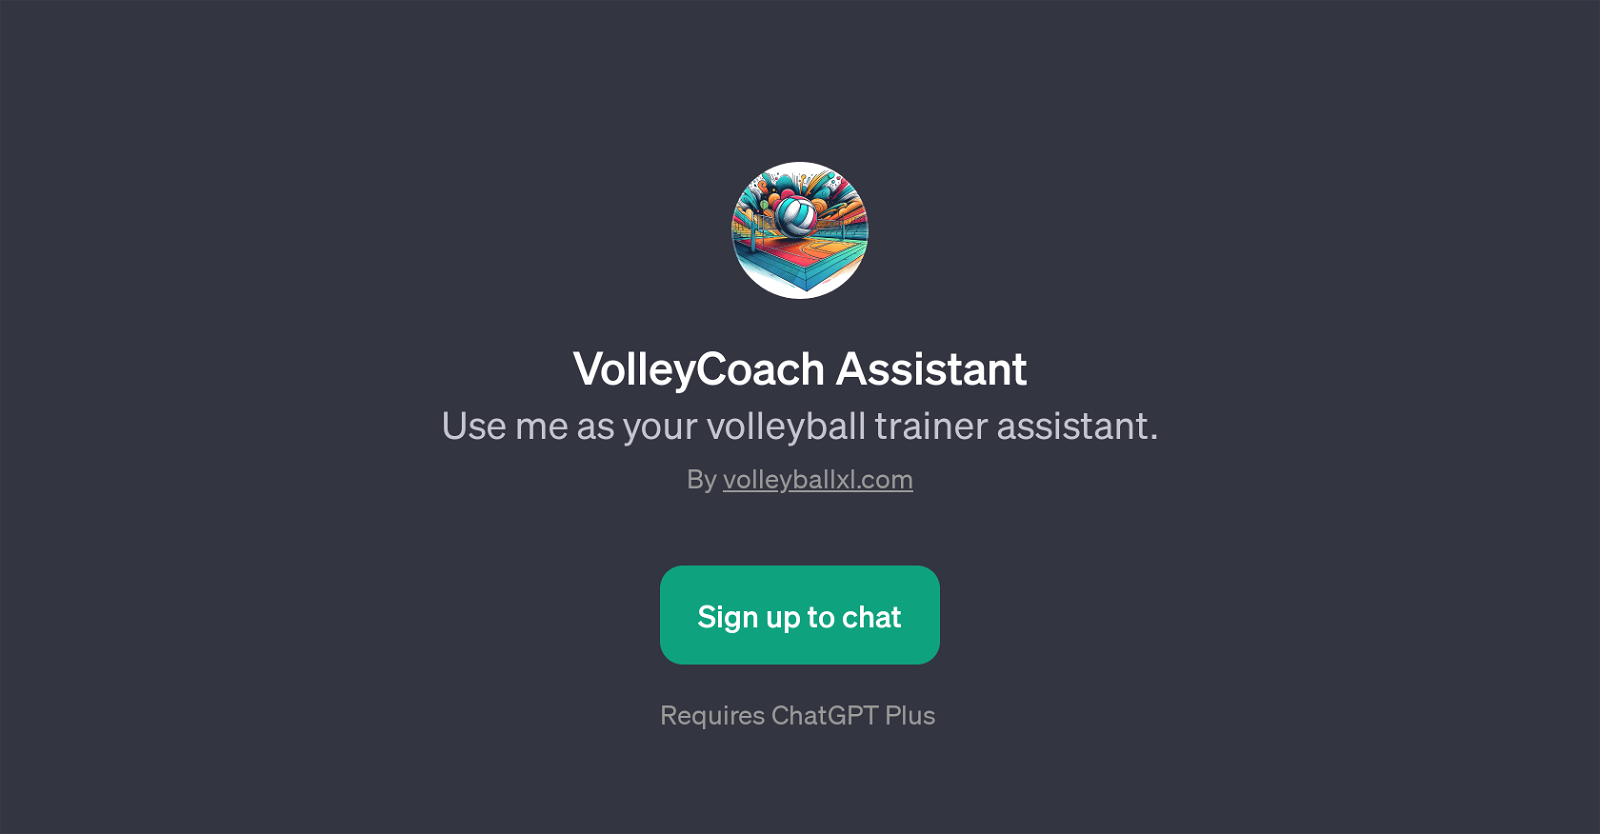 VolleyCoach Assistant website